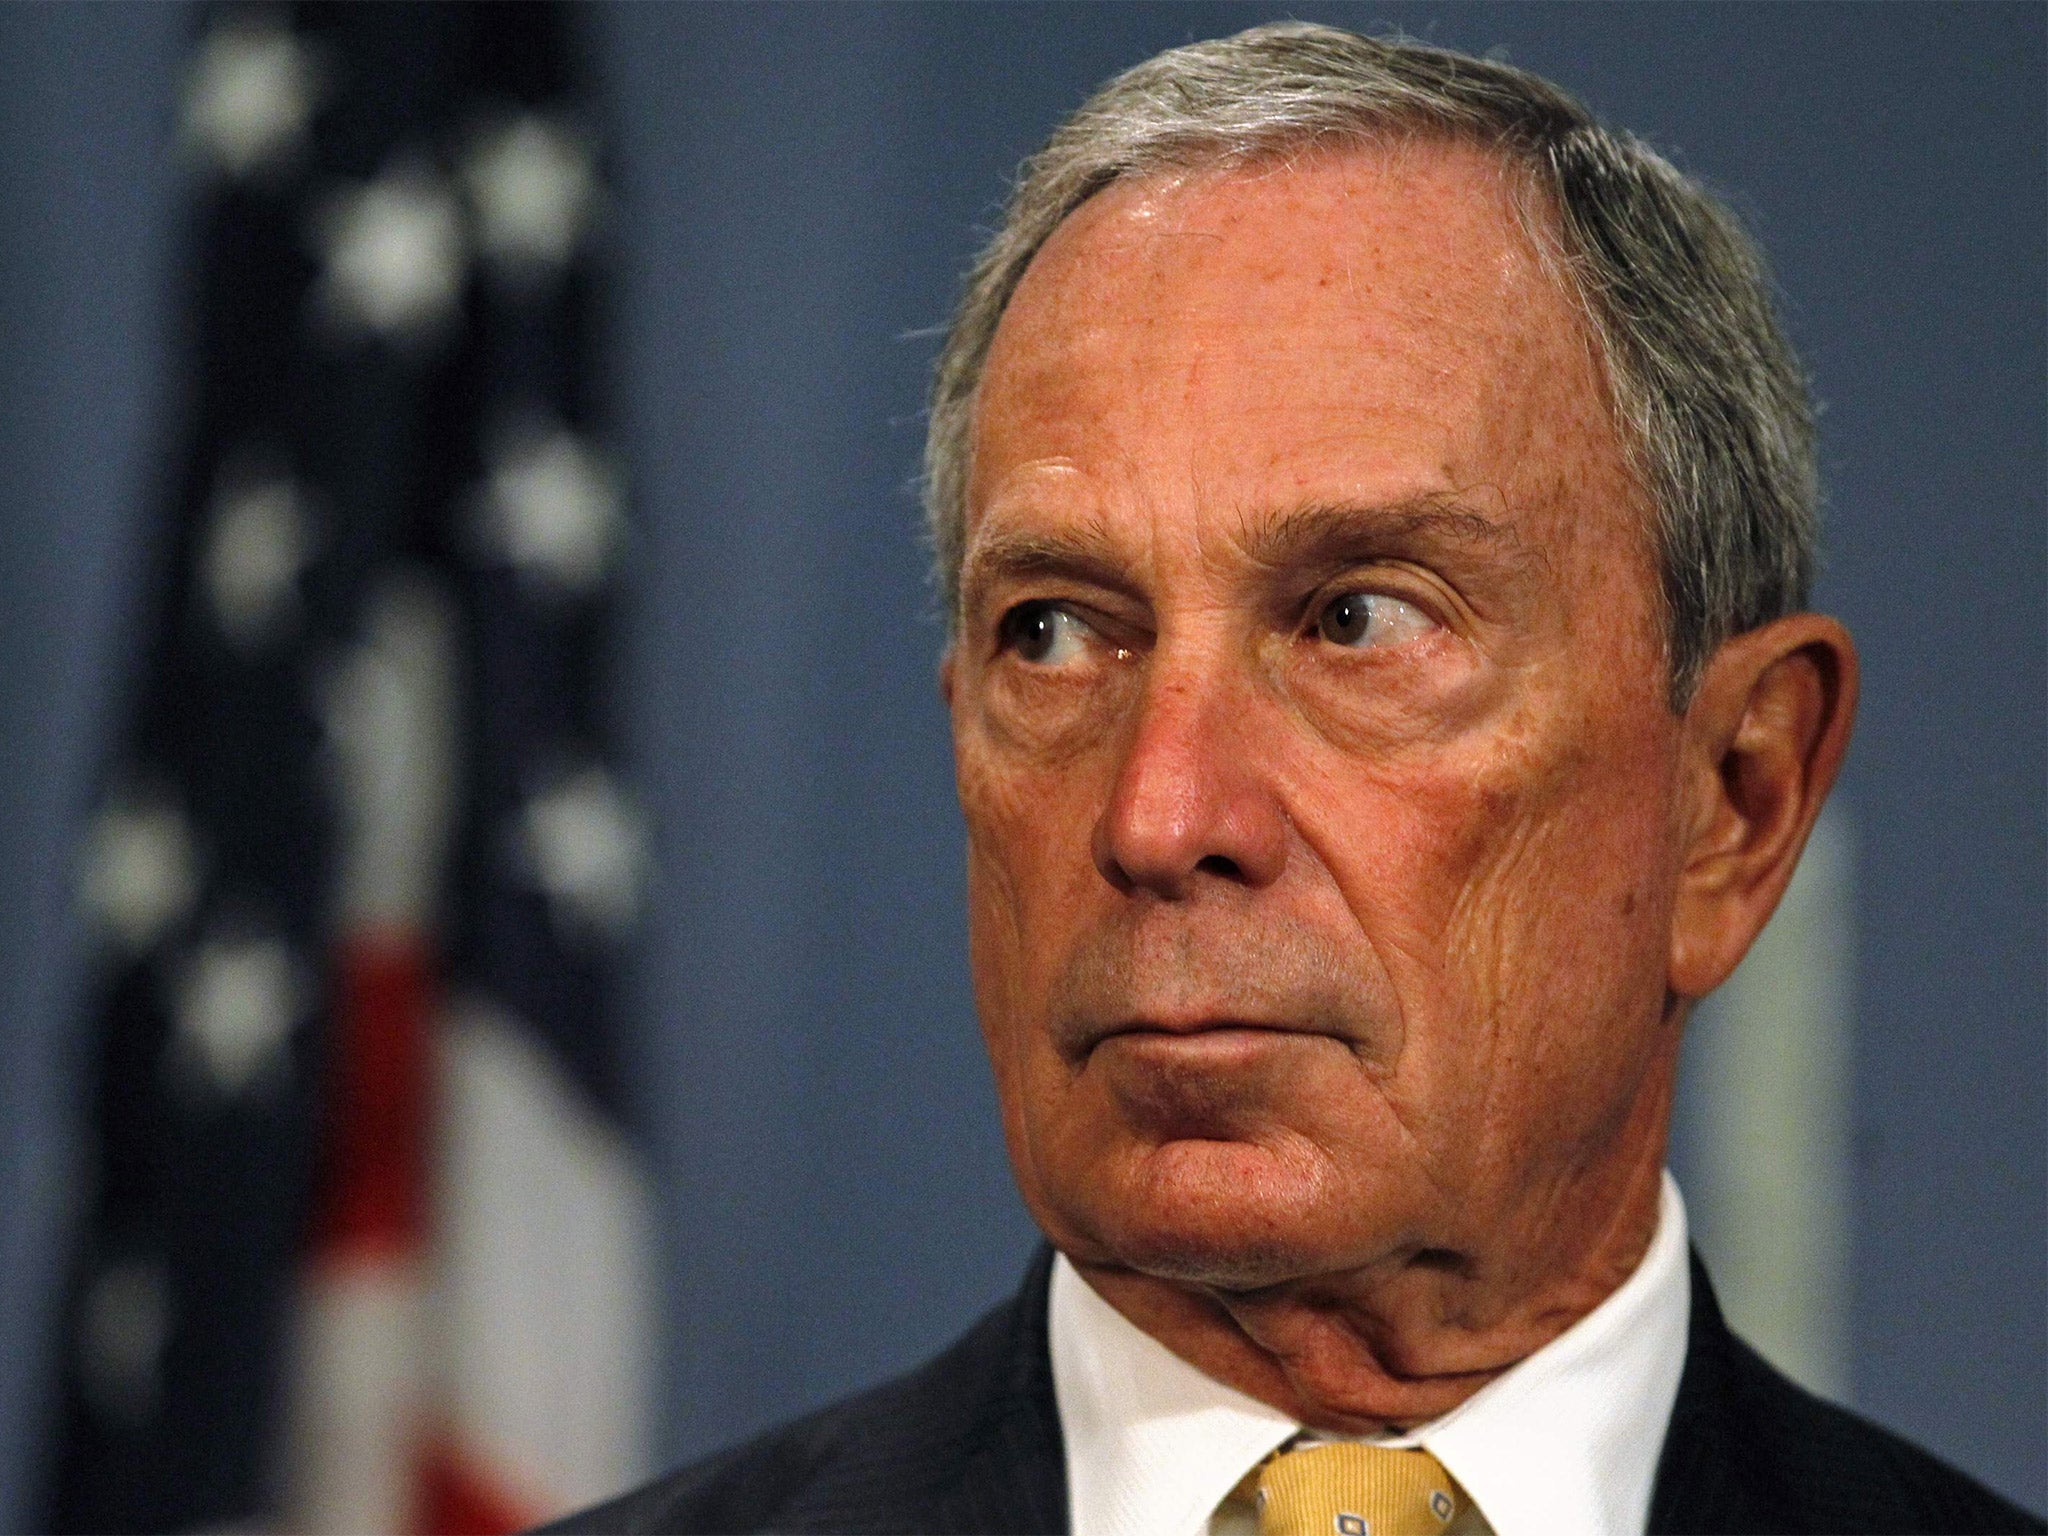 Former New York mayor Michael Bloomberg had considered standing as an independent